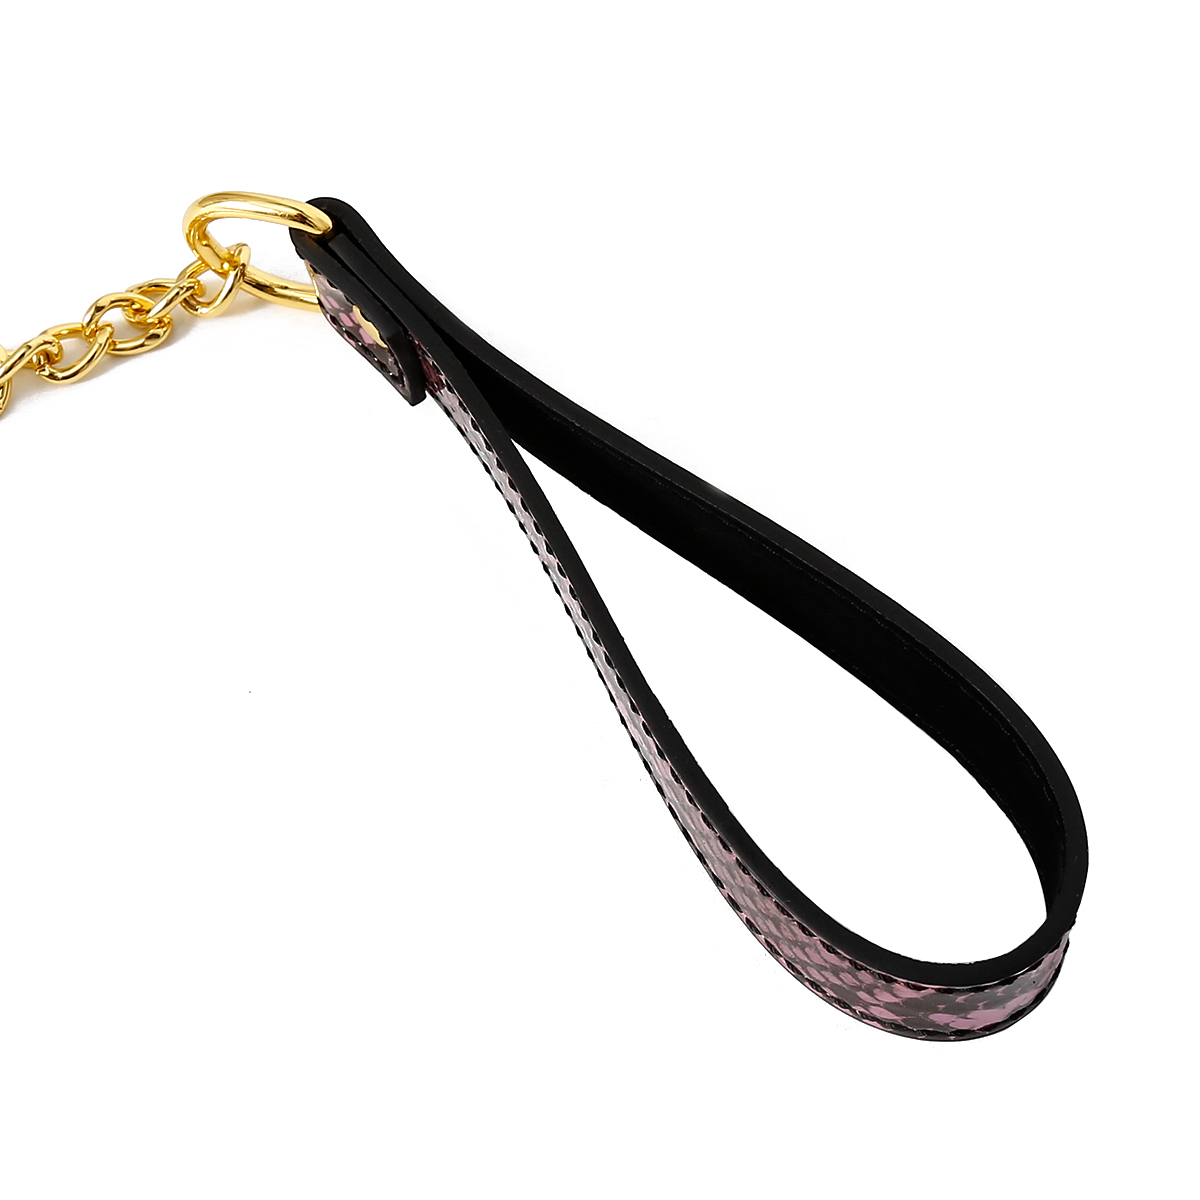 Collar-GoldPink-Reptile-with-Leash-OPR-321128-7